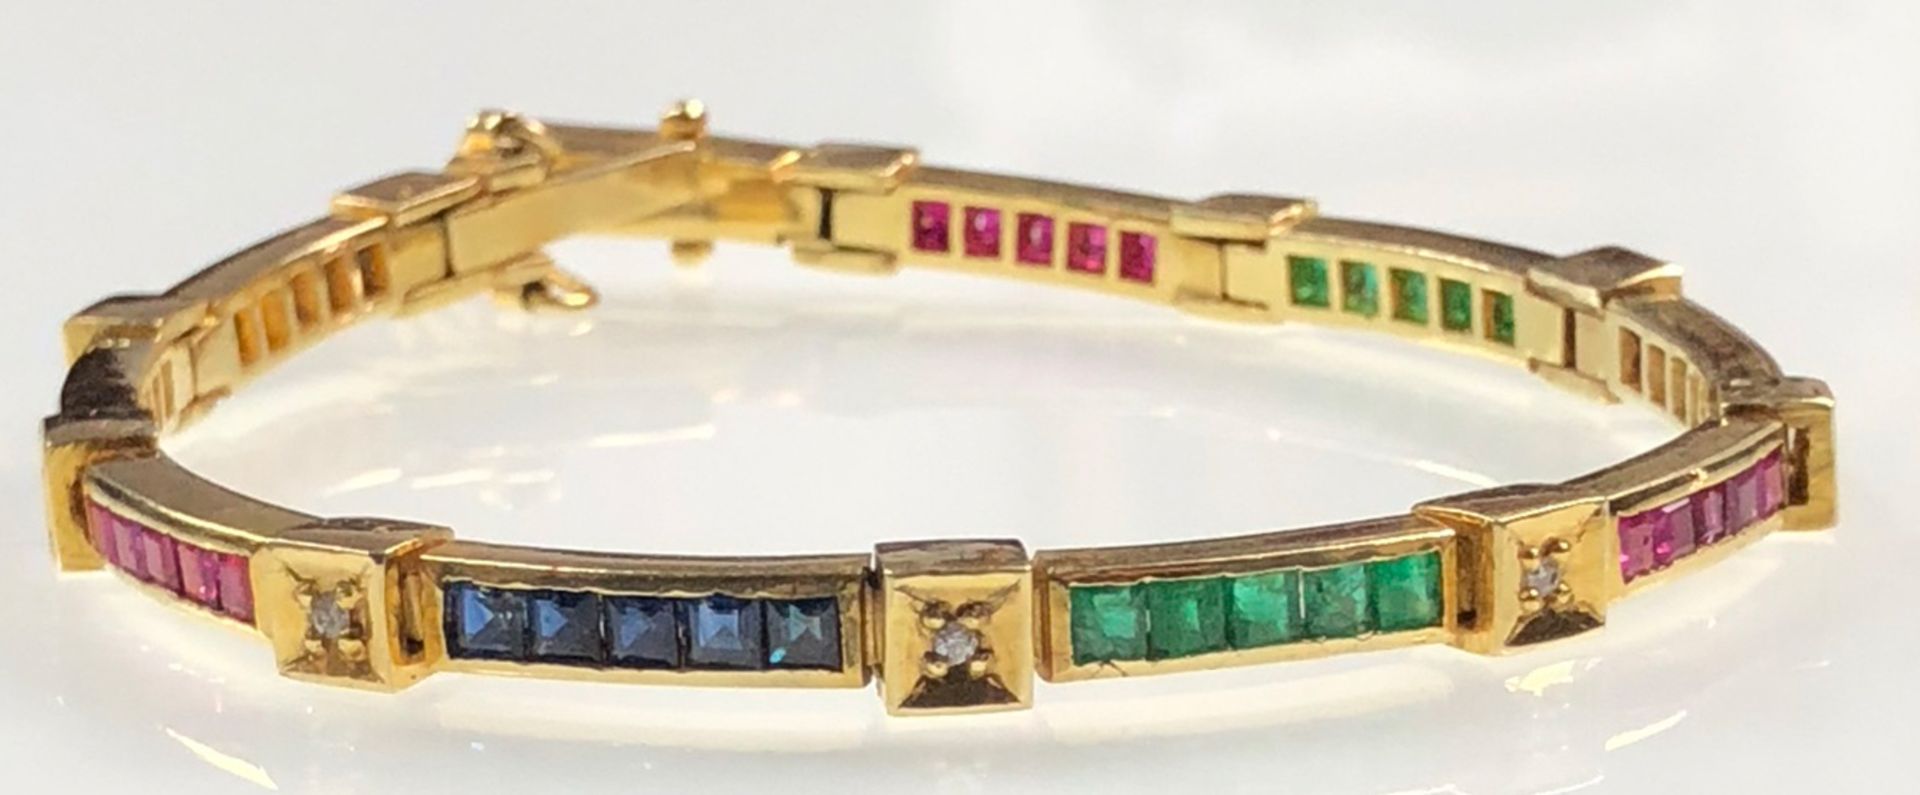 Yellow gold bracelet. Tested 18 carat. Diamonds, sapphires and rubies.